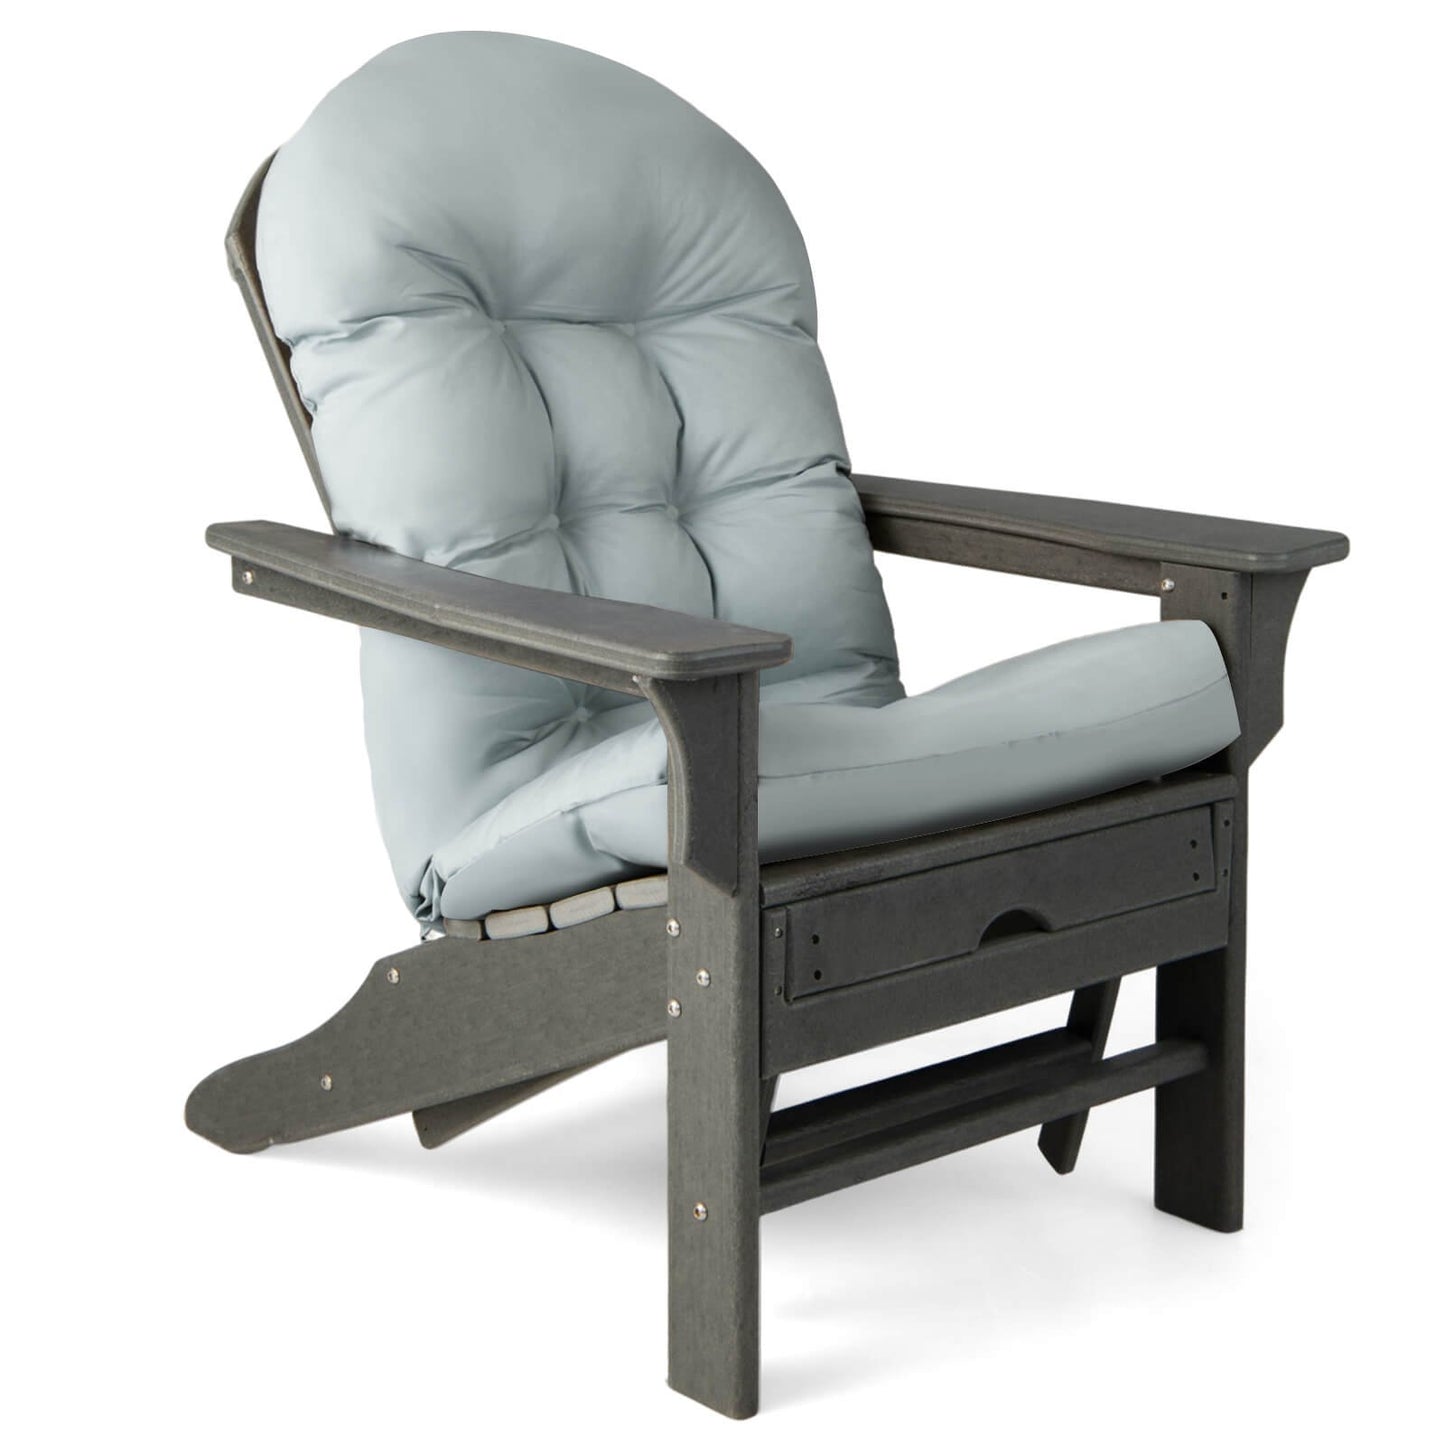 Patio Adirondack Chair Cushion with Fixing Straps and Seat Pad, Gray - Gallery Canada